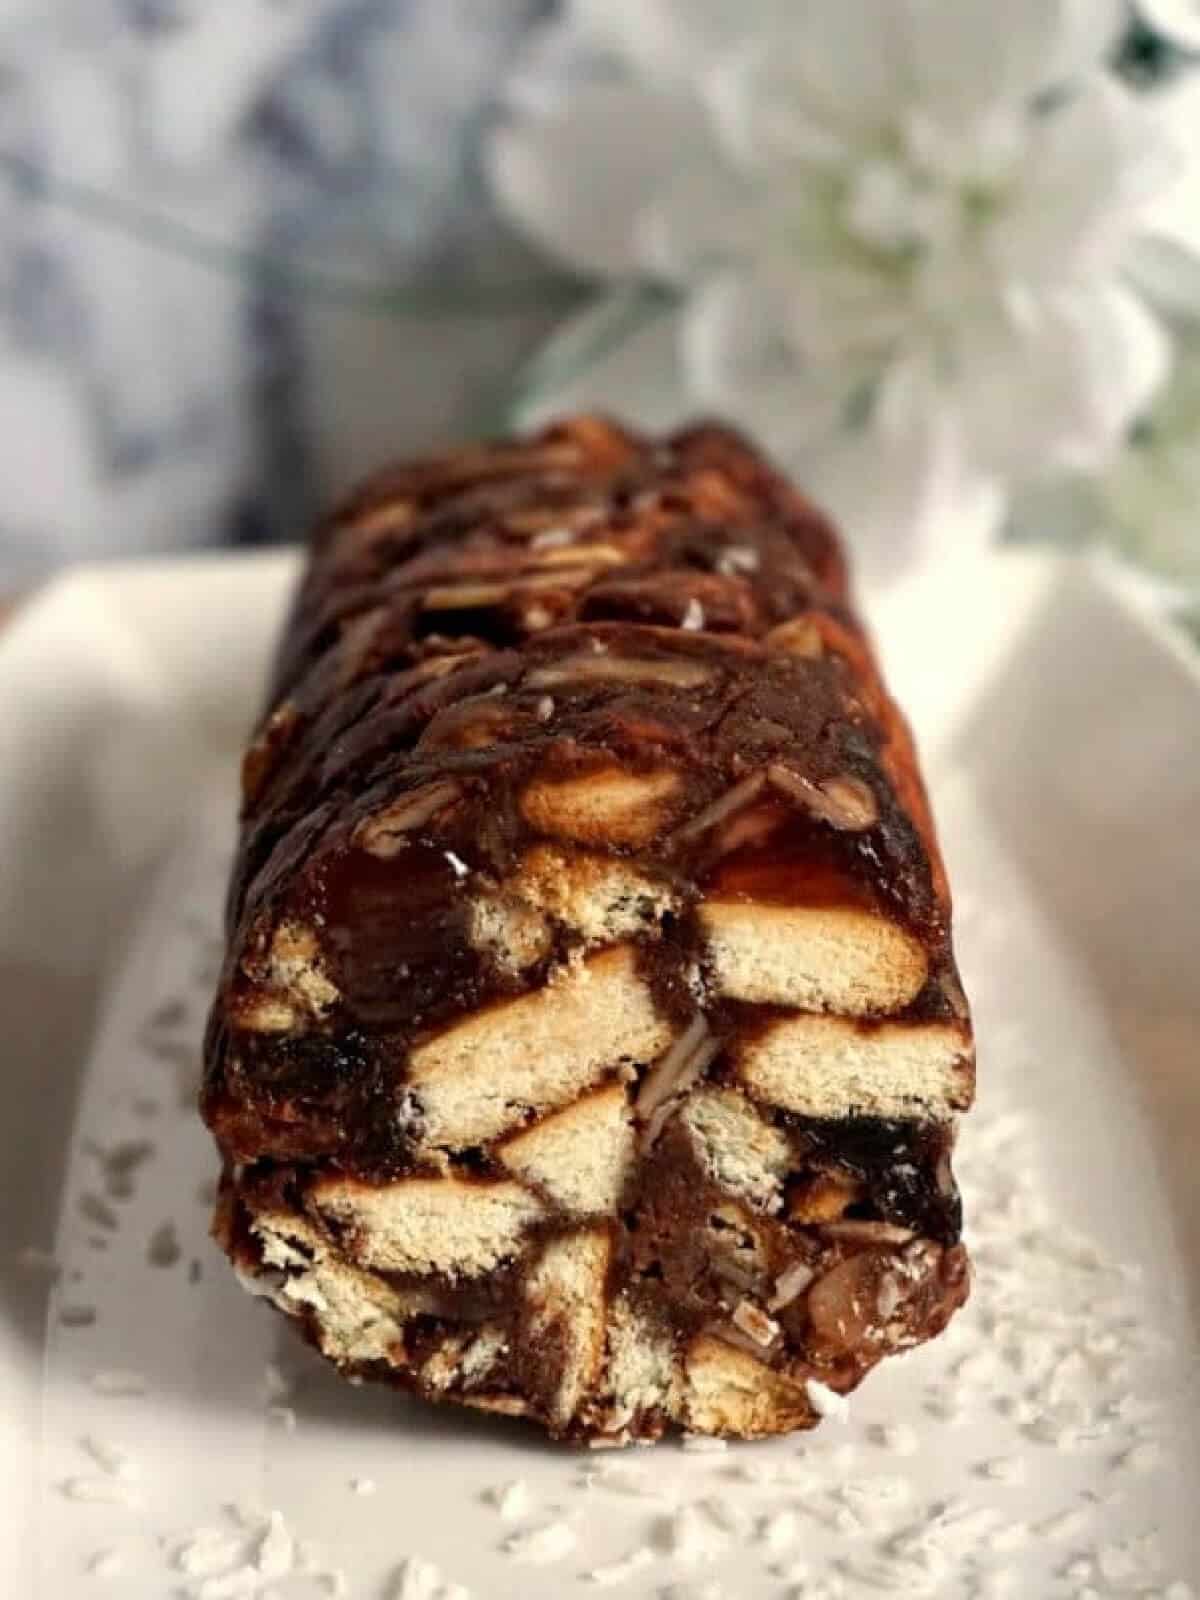 A roll of chocolate salami.